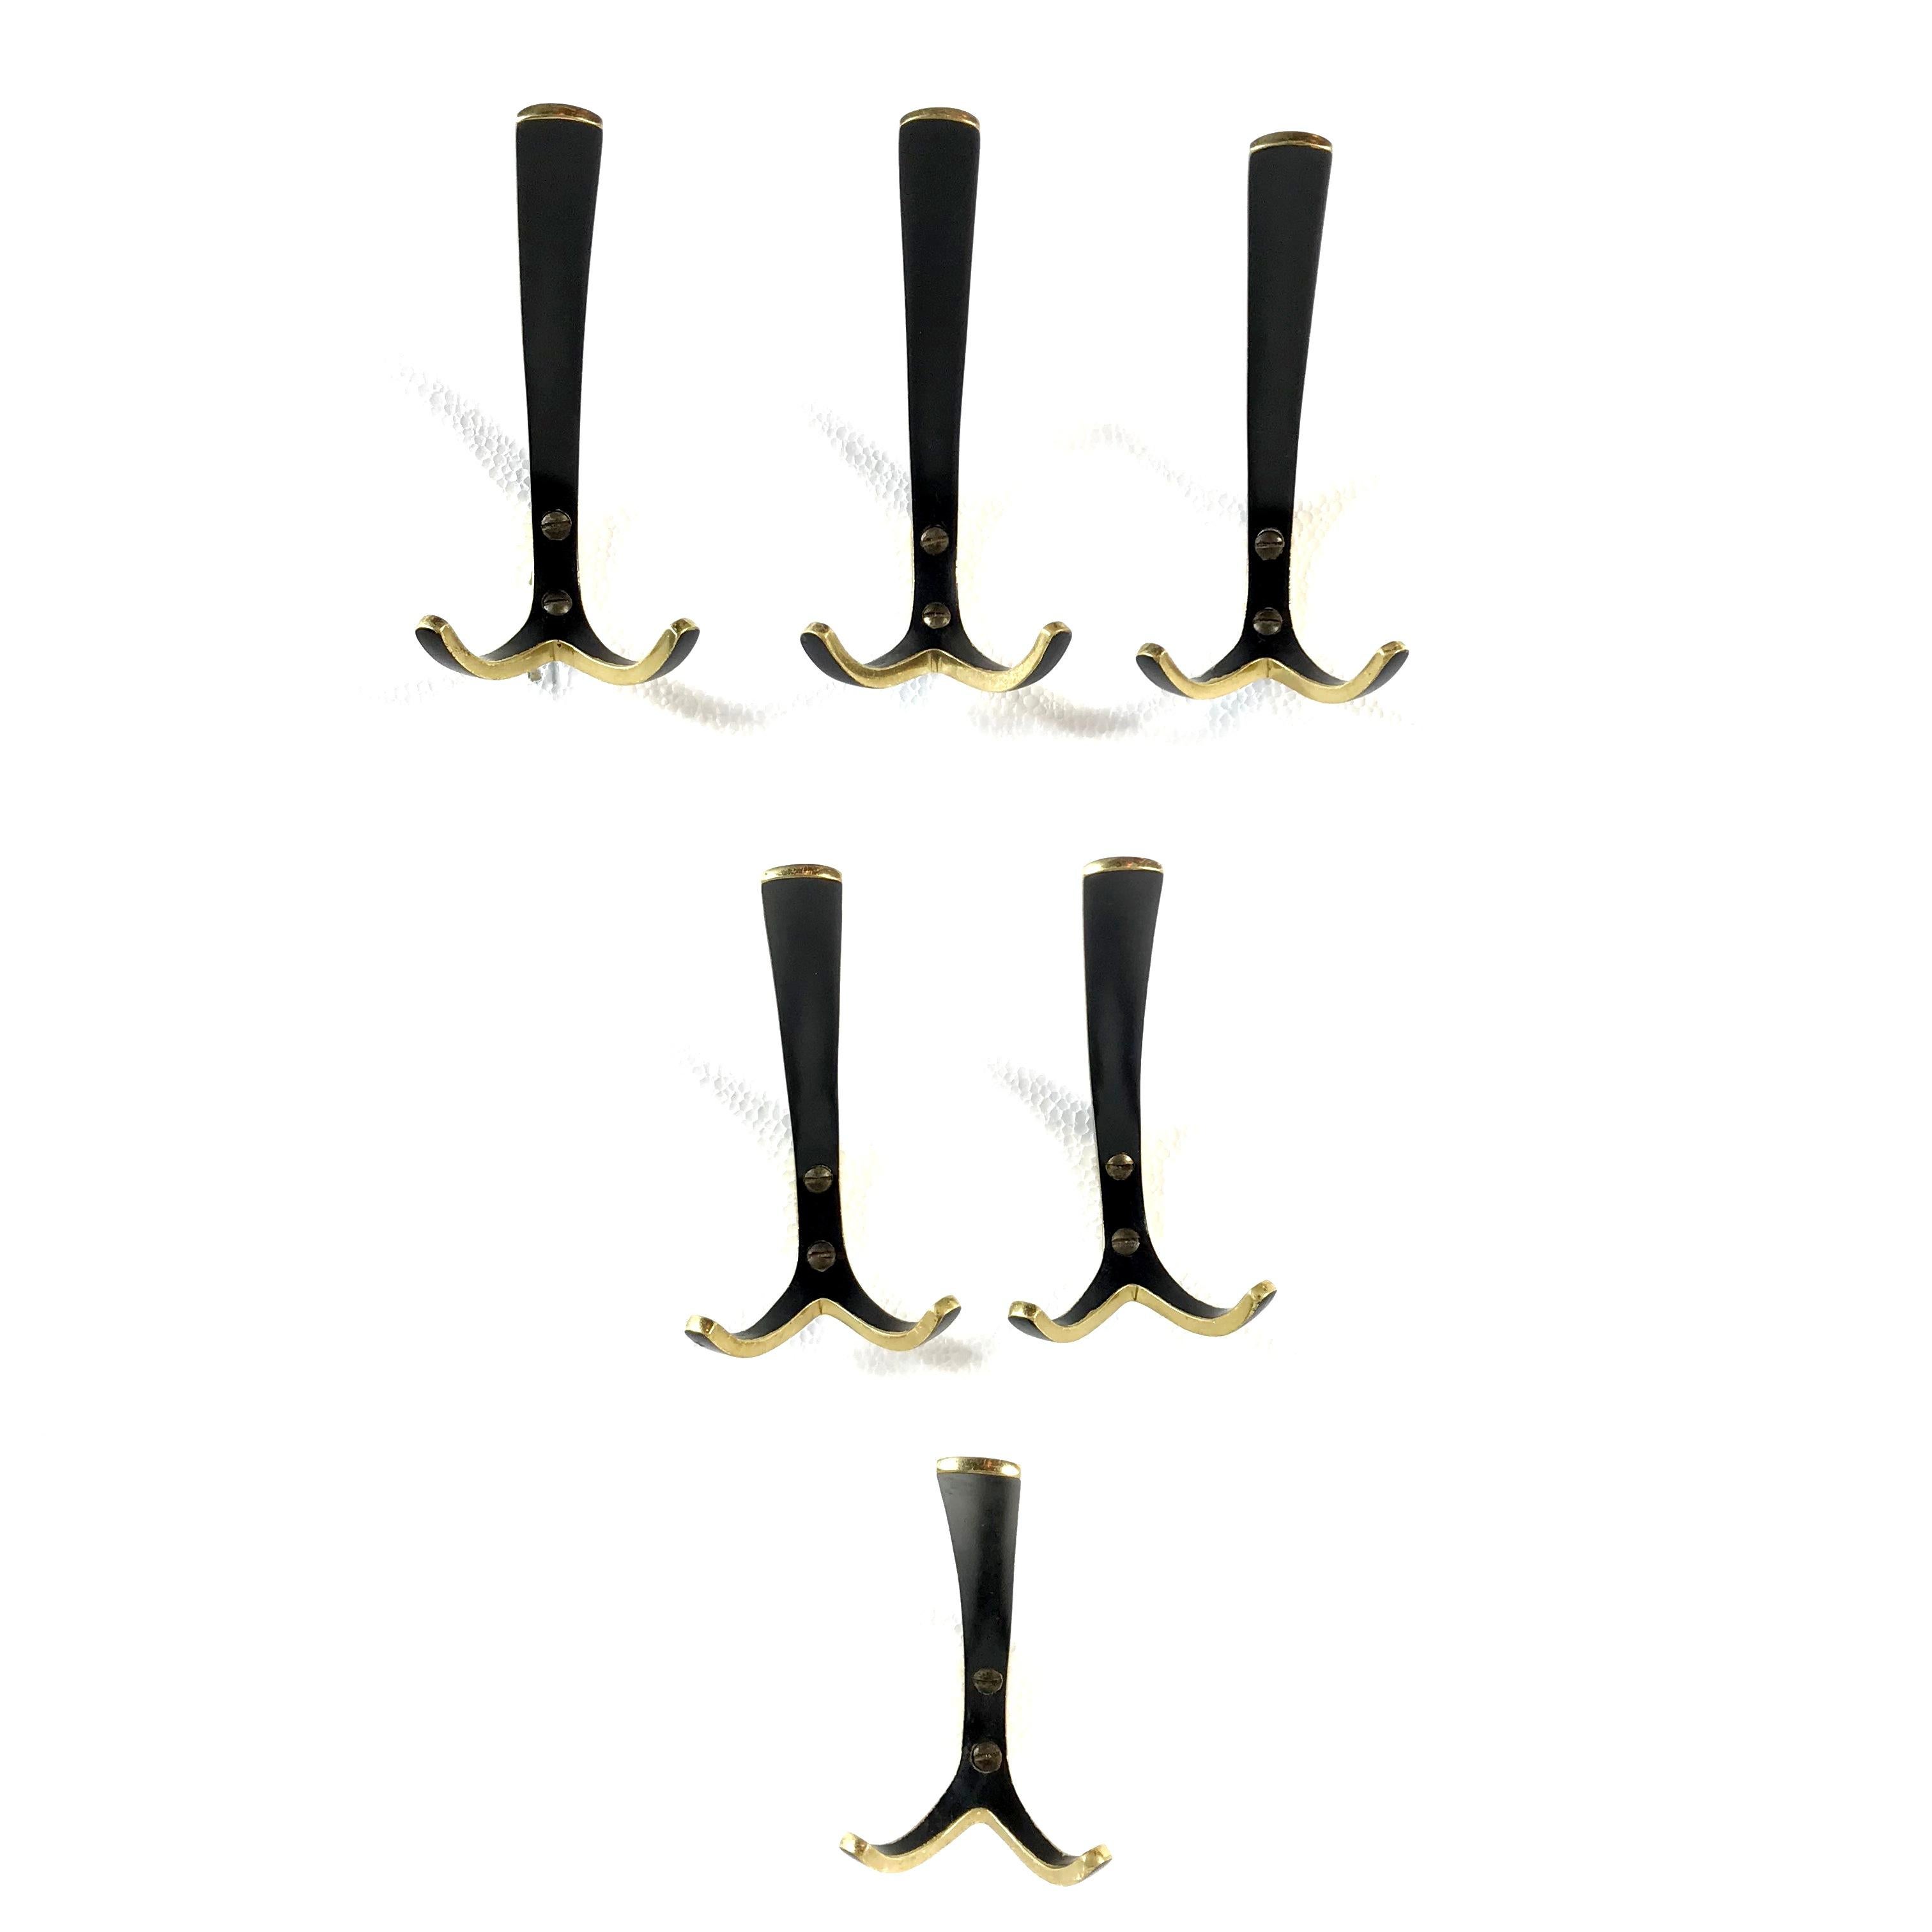 Beautiful Austrian midcentury solid brass hooks by Hertha Baller from 1950s. They are in the style of Auböck and competed with Auböck in their time. They are made of polished solid brass partly black lacquered and come with the original brass